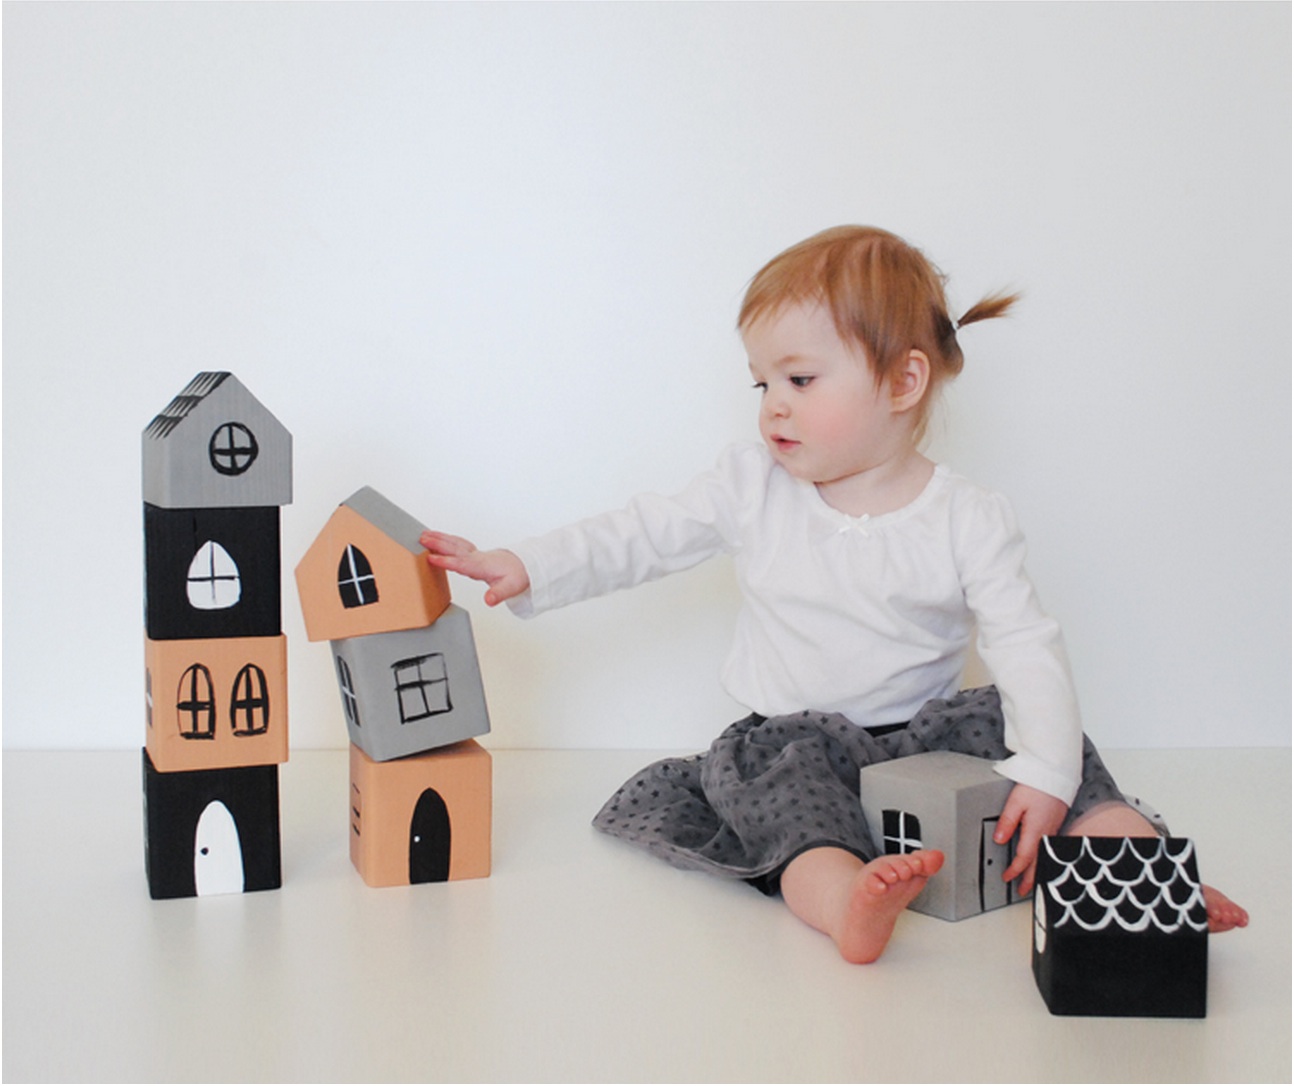 6 wooden blocks crafts to make those old toddler toys new and fun again